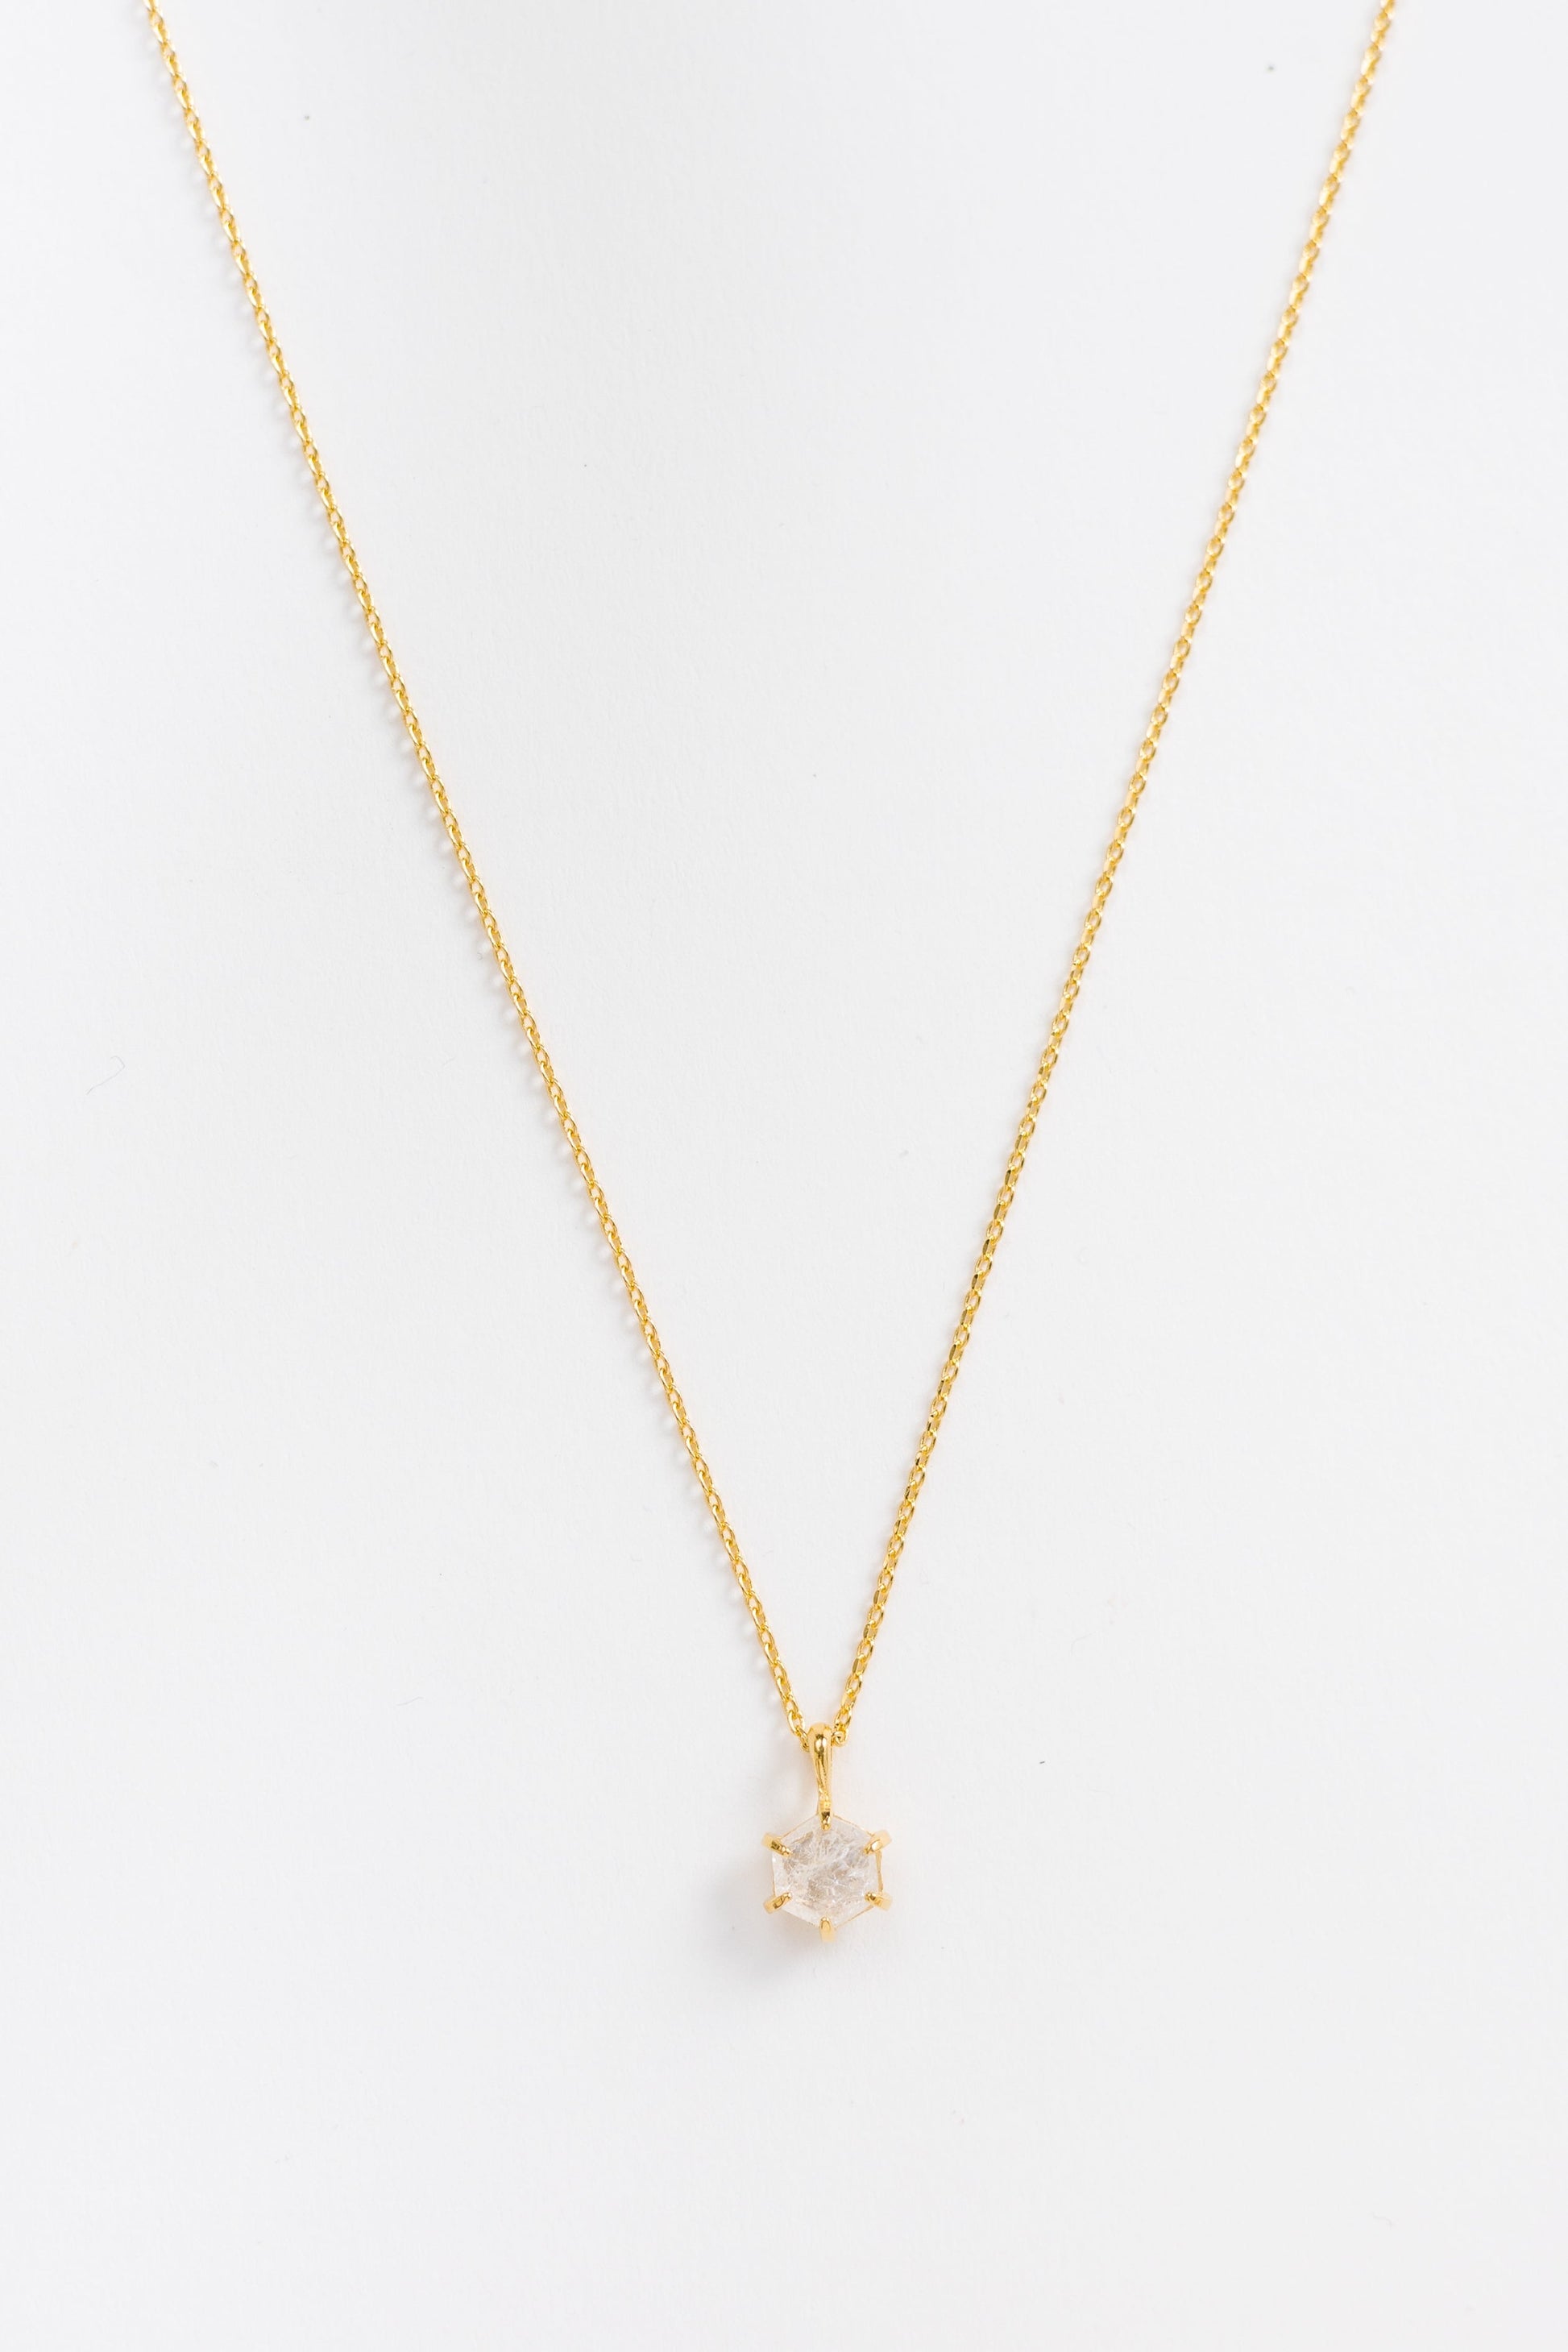 Cove Windsor Necklace WOMEN'S NECKLACE Cove Accessories Gold 16" 